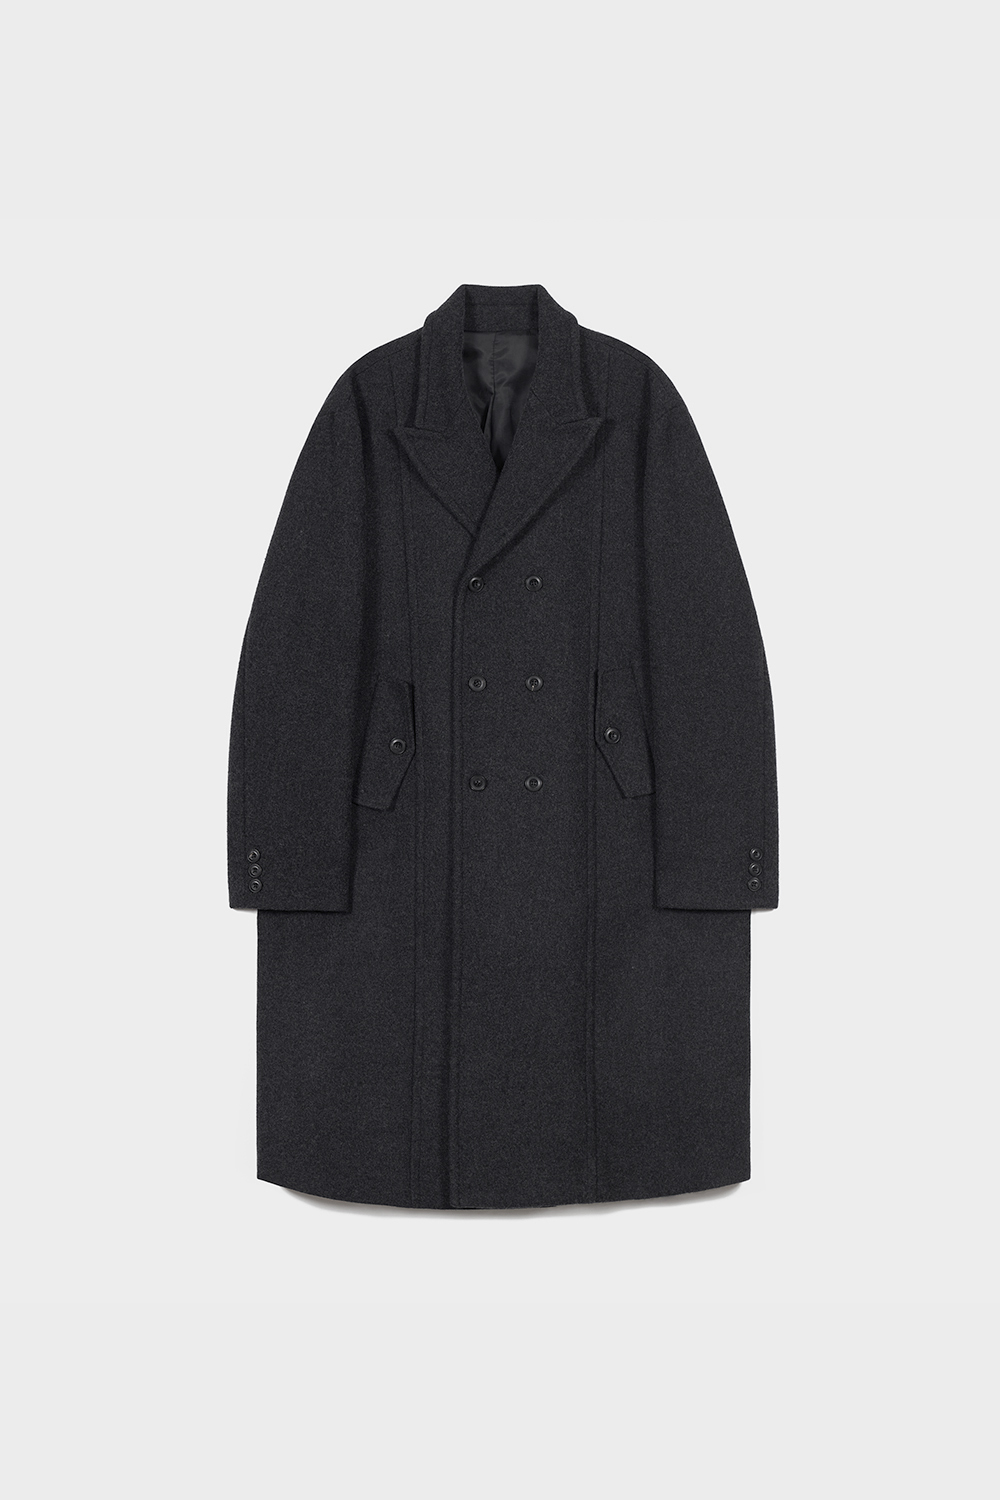 Melton Wool Double Breasted Coat (Charcoal)